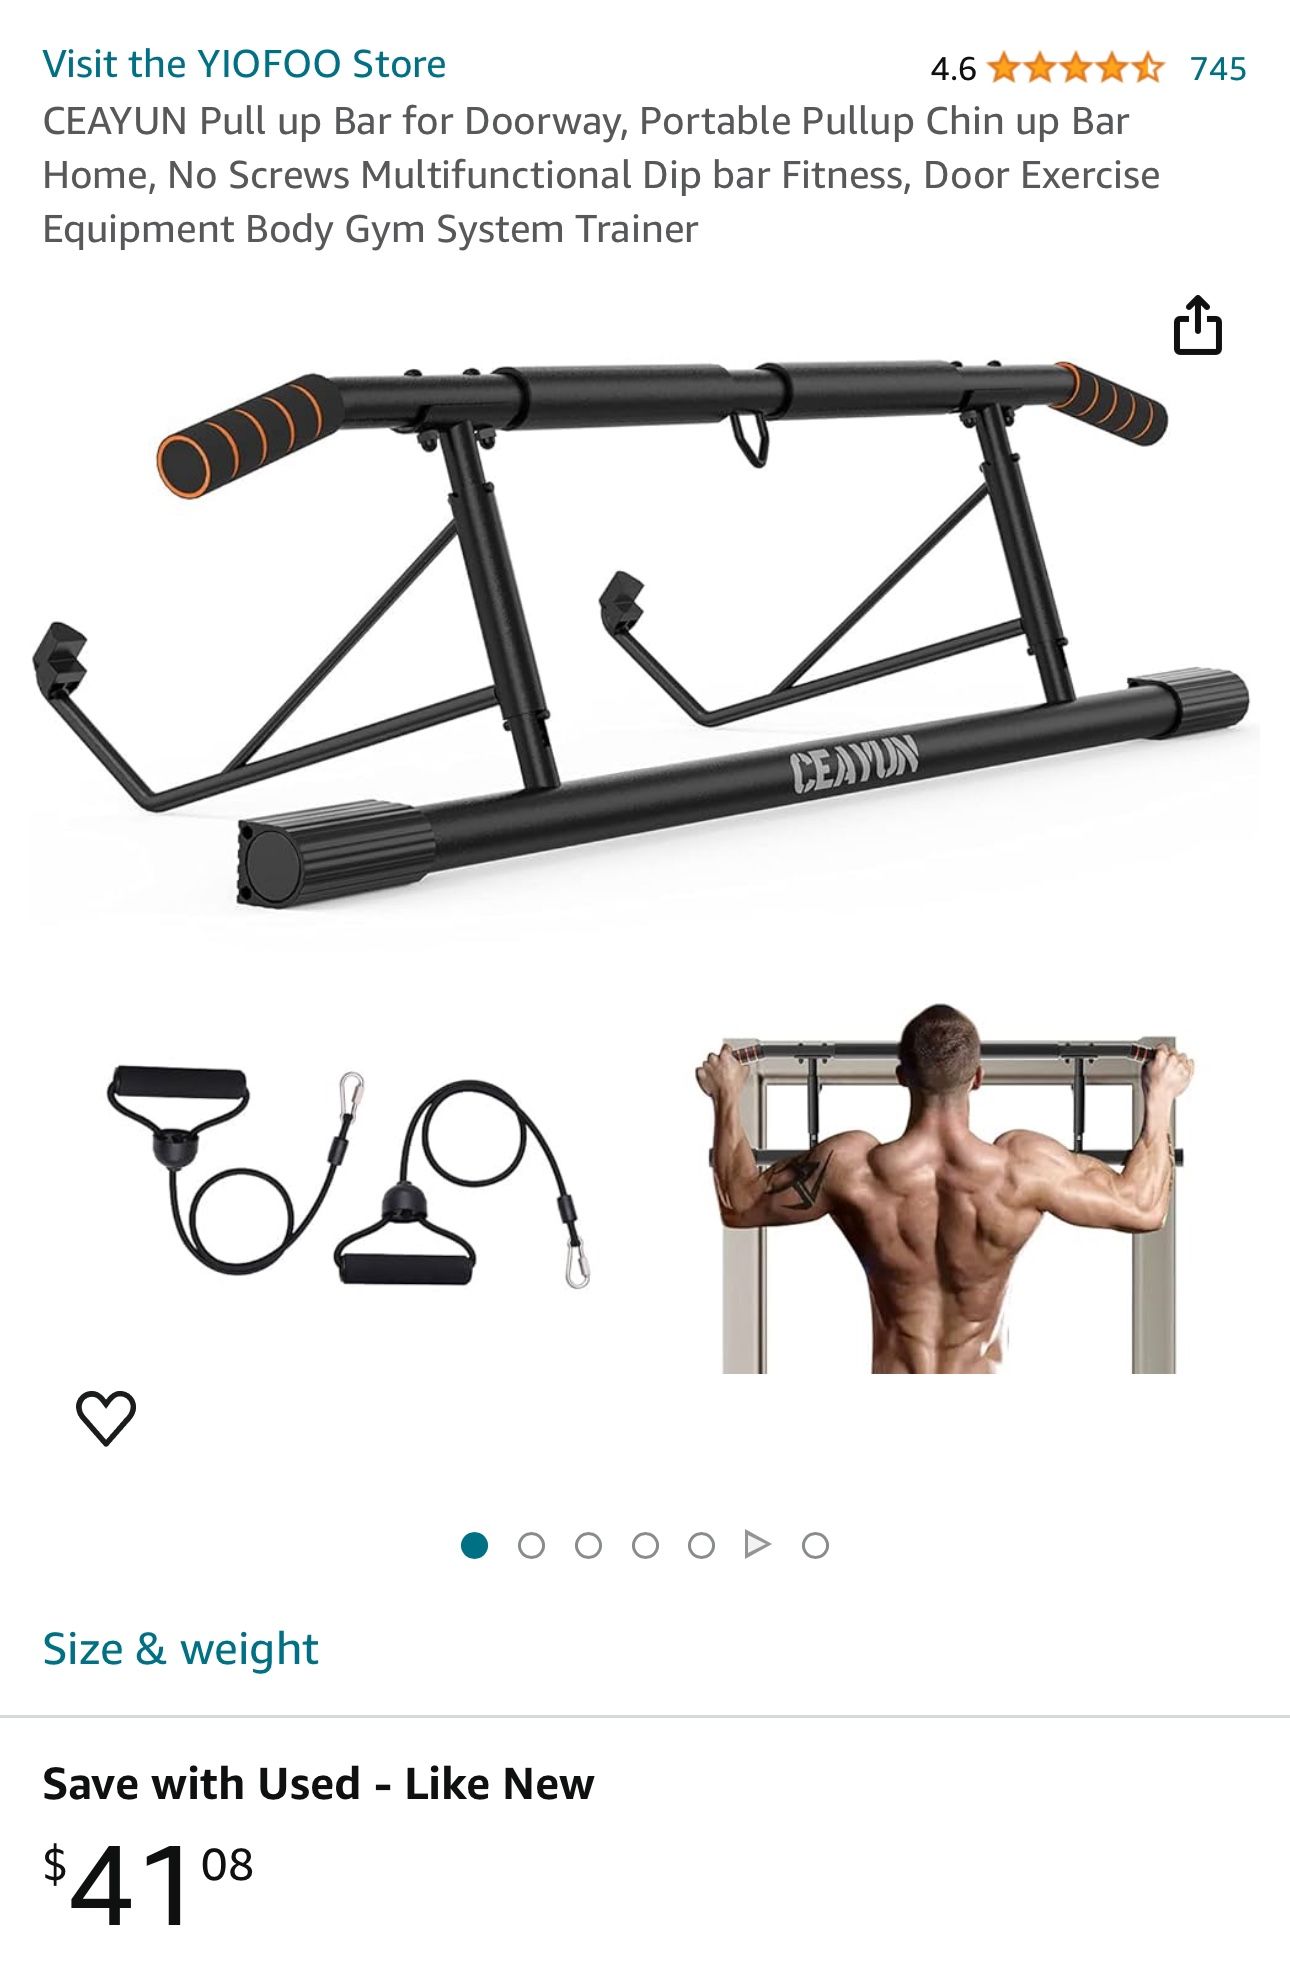 CEAYUN Pull up Bar for Doorway, Portable Pullup Chin up Bar Home, No Screws Multifunctional Dip bar Fitness, Door Exercise Equipment Body Gym System T